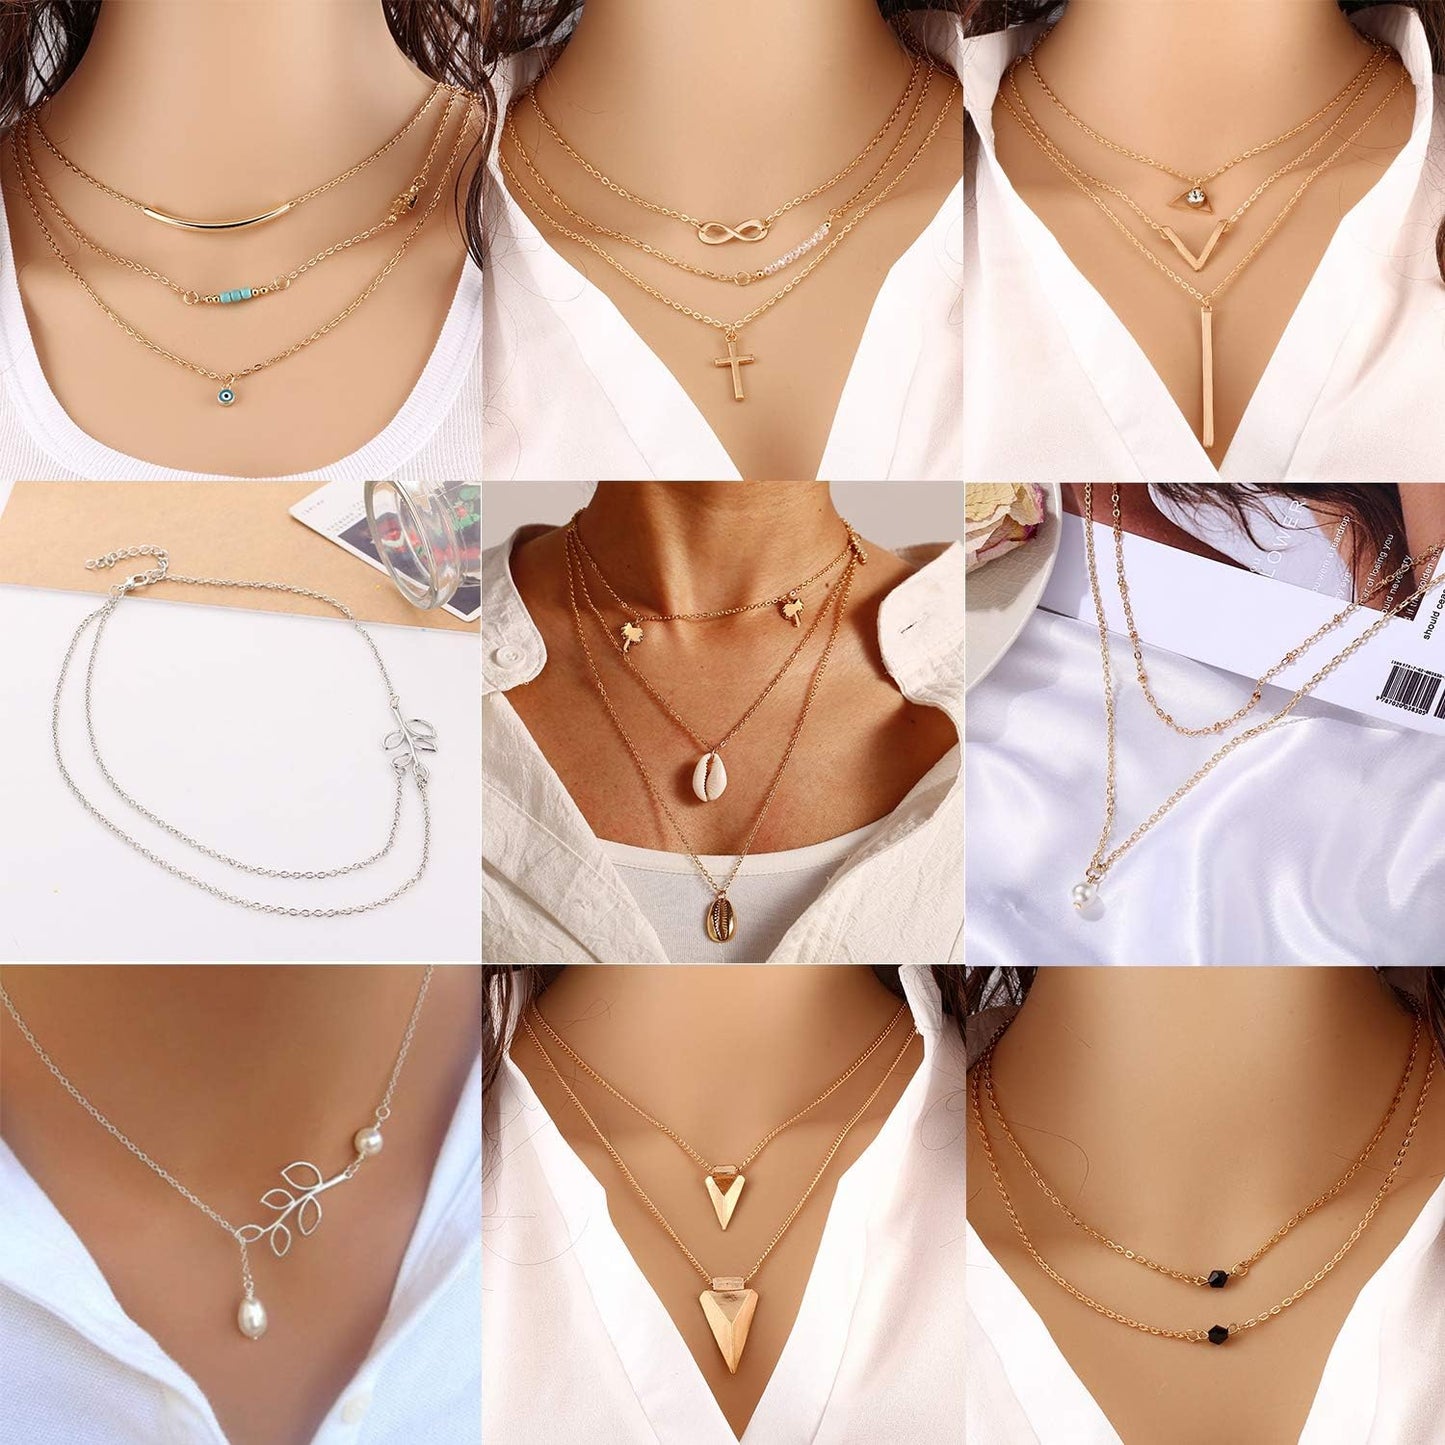 20 PCS Pendant Necklace with 14 PCS Gold,6 PCS Sliver,20 Styles of Necklaces for Women Girls Jewelry Fashion and Valentine Birthday Party Gift